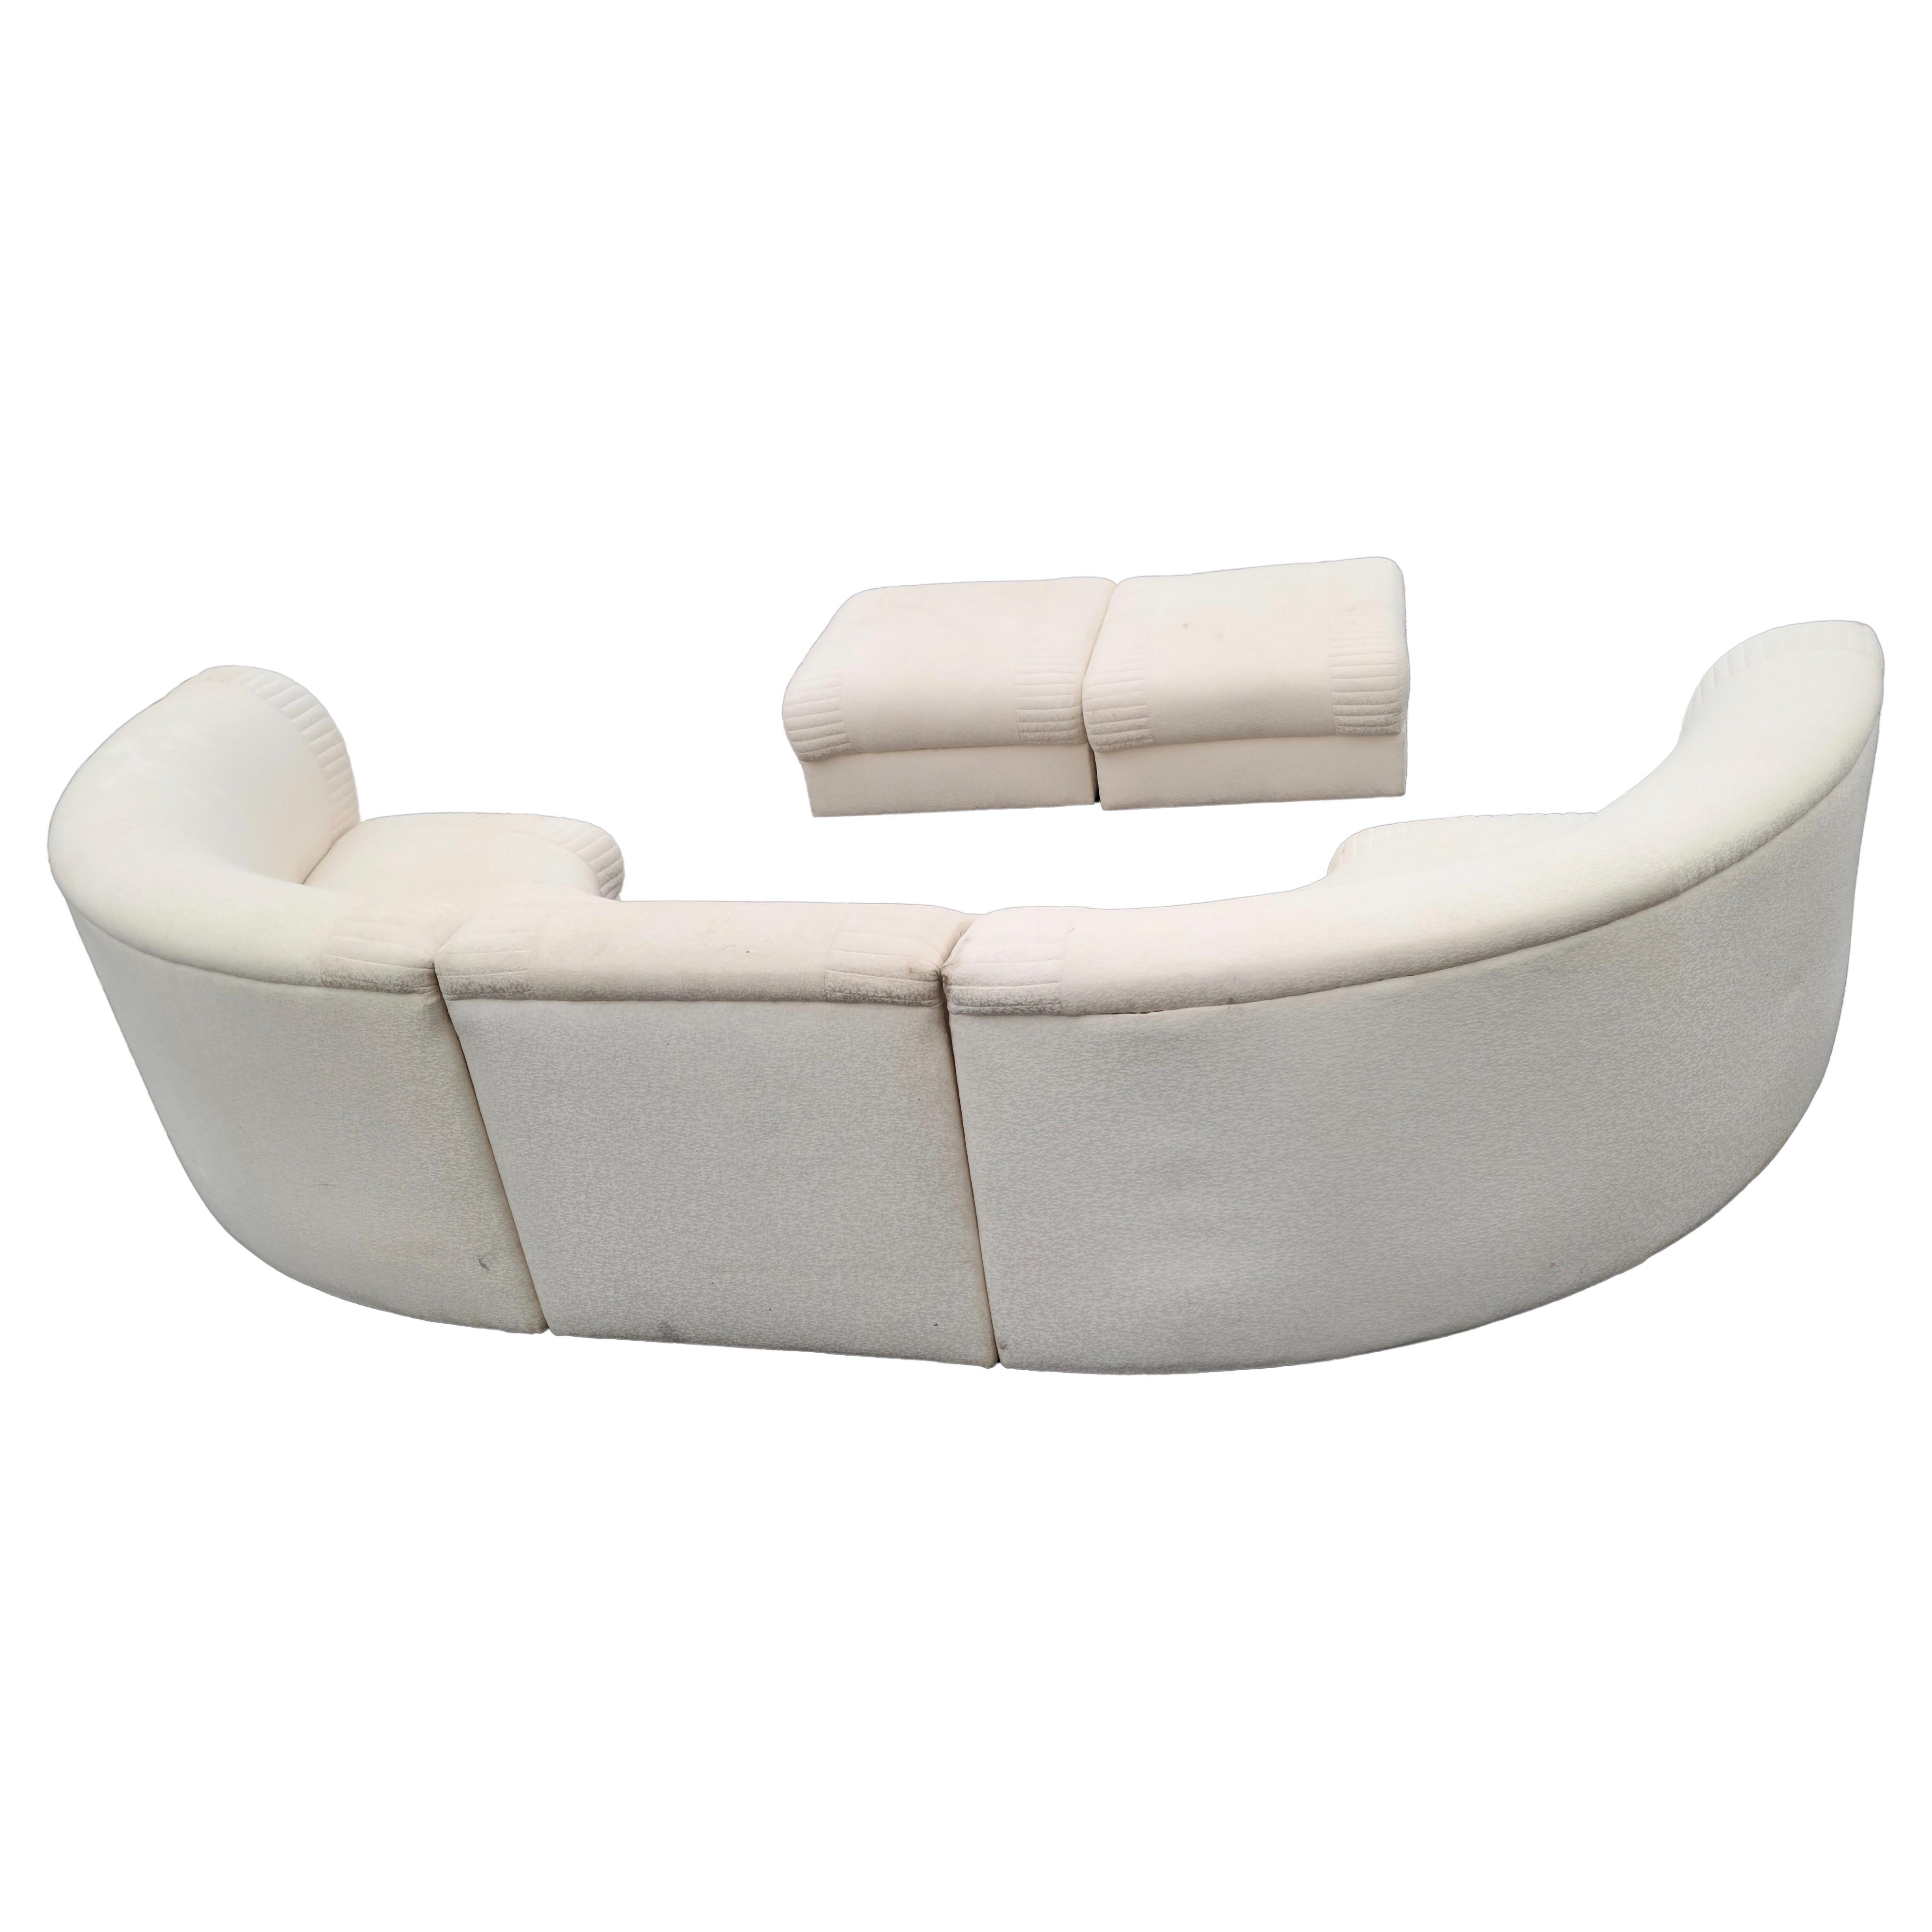 Serpentine sectional sofa by Weiman style of Kagan 1